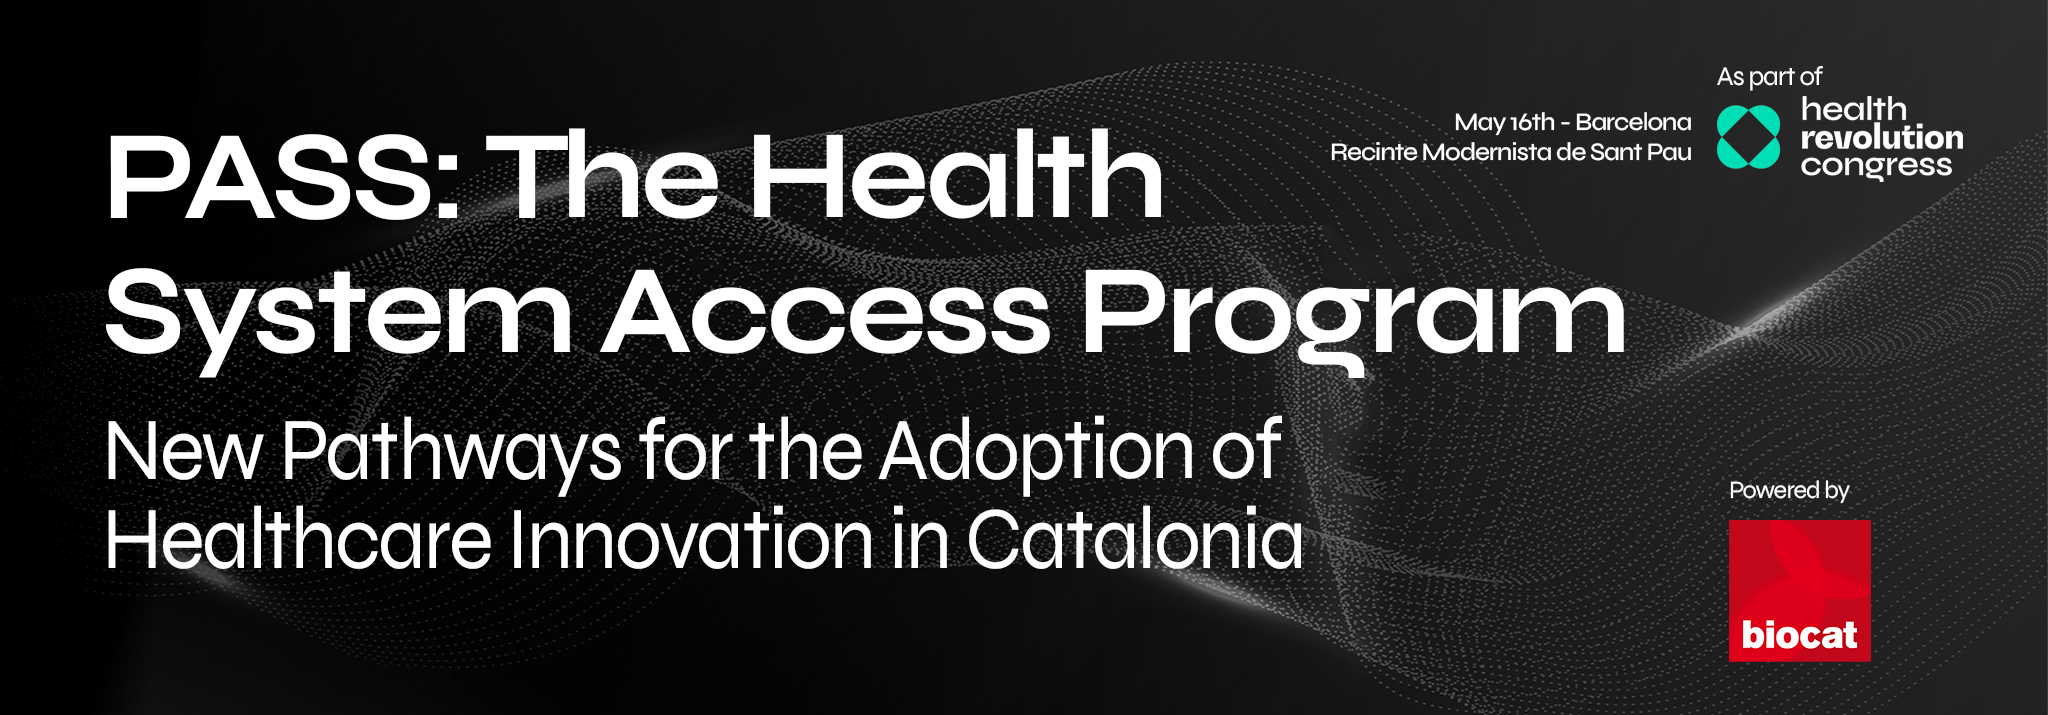 Stage Biocat: New Pathways for the Adoption of Healthcare Innovation in Catalonia